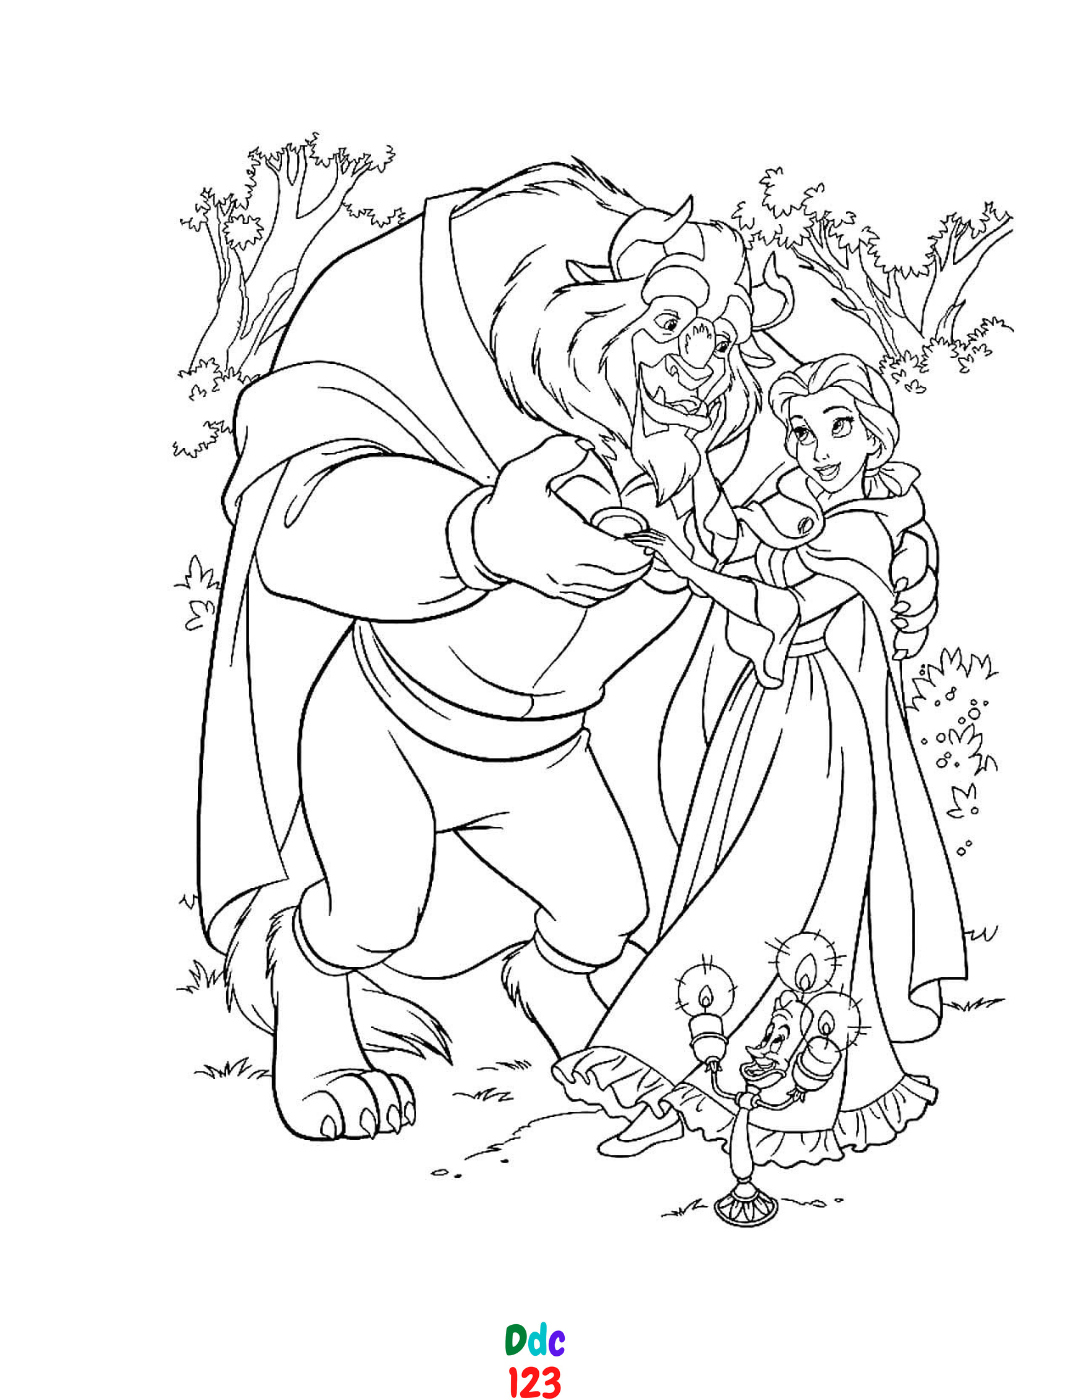 Beauty and the Beast Coloring Pages for kids - DDC123